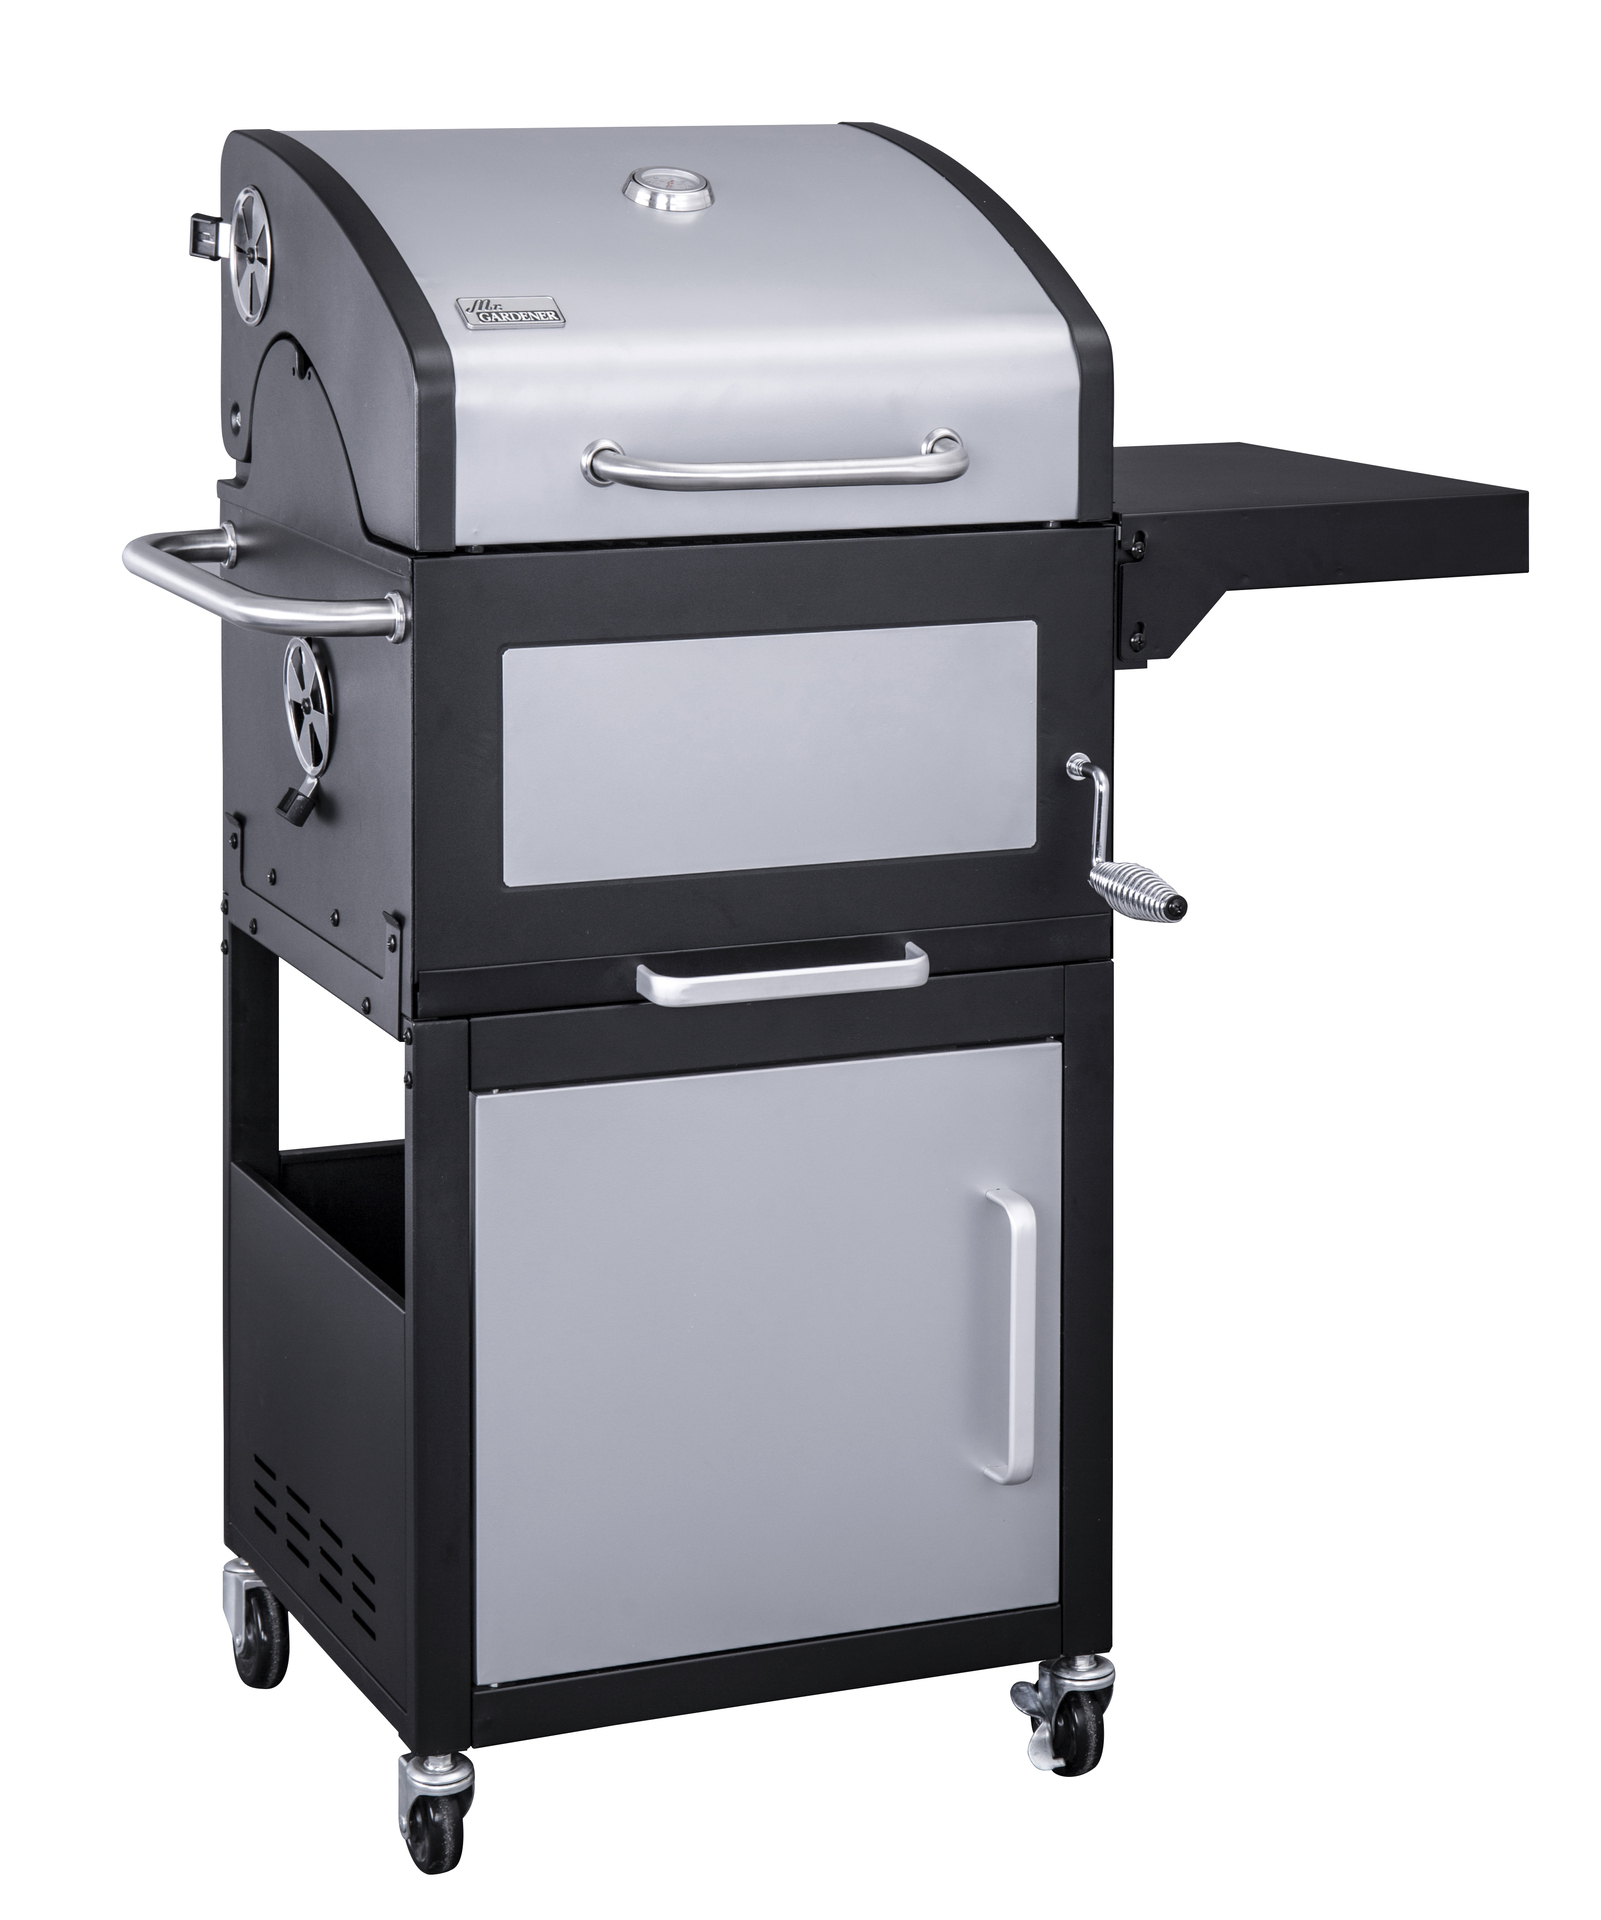 Holzkohlegrill Michigan R mit Rost-In-Rost System